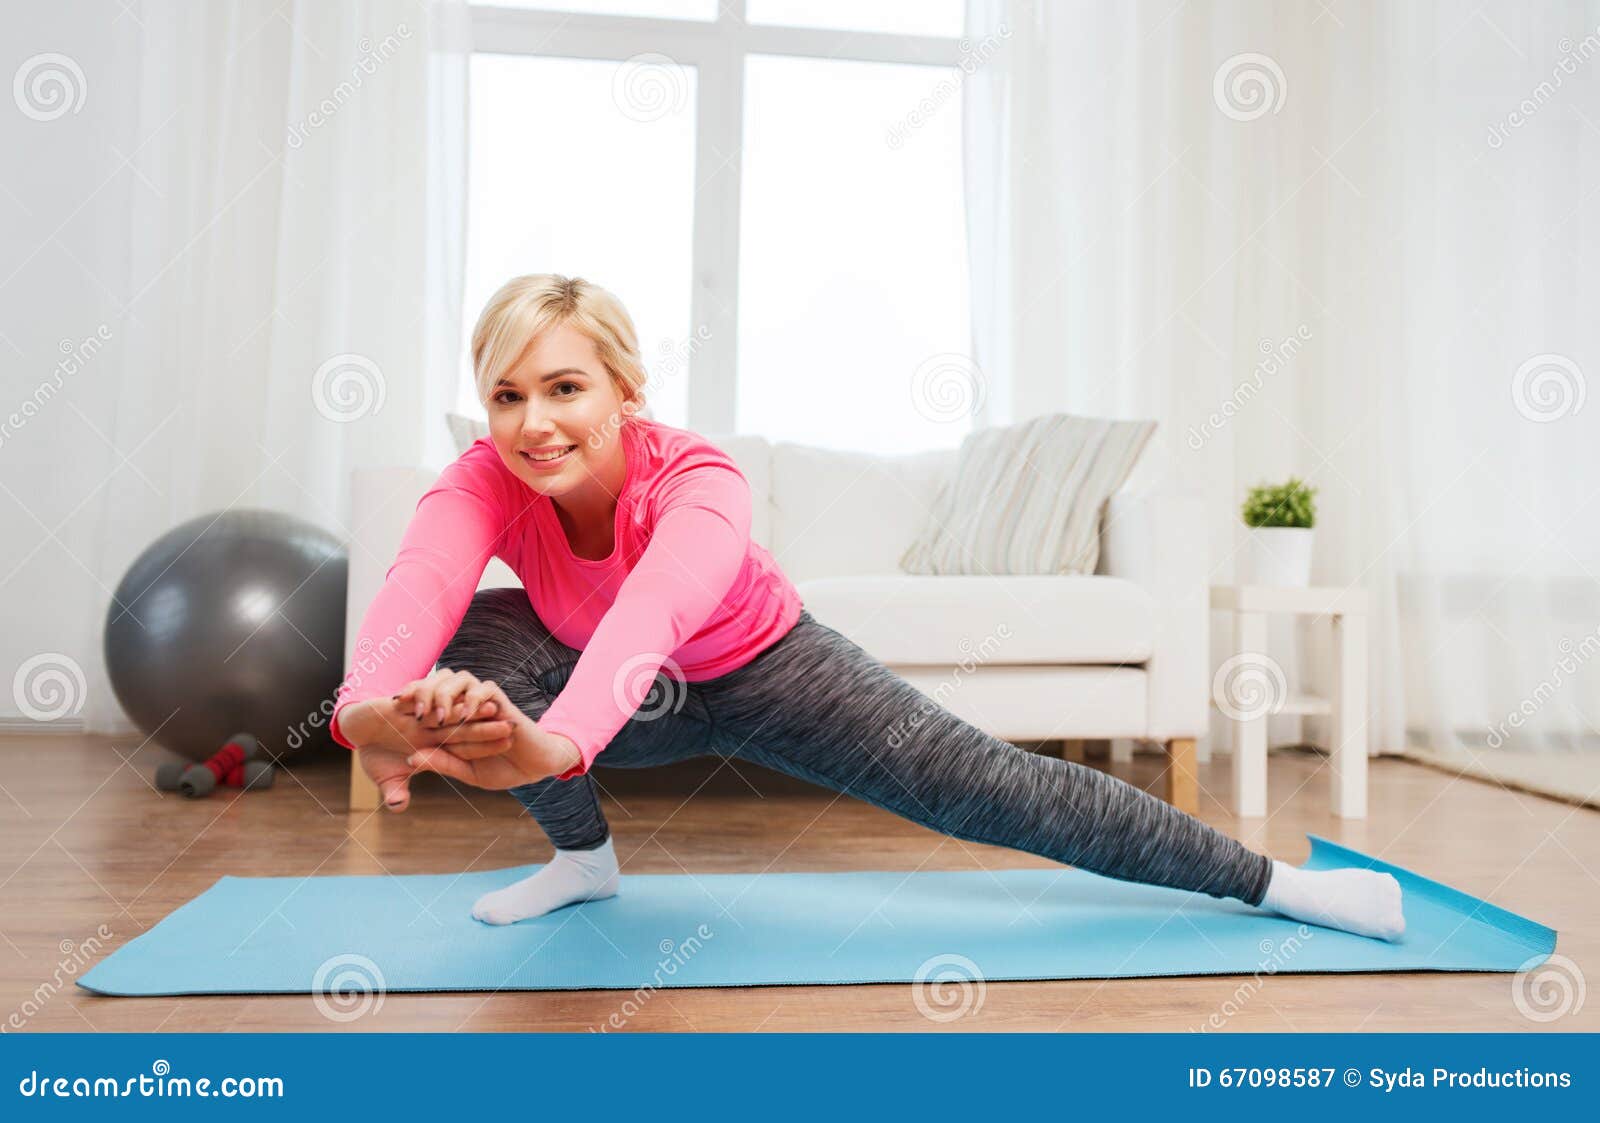 Happy Woman Stretching Leg On Mat At Home Stock Image Image Of